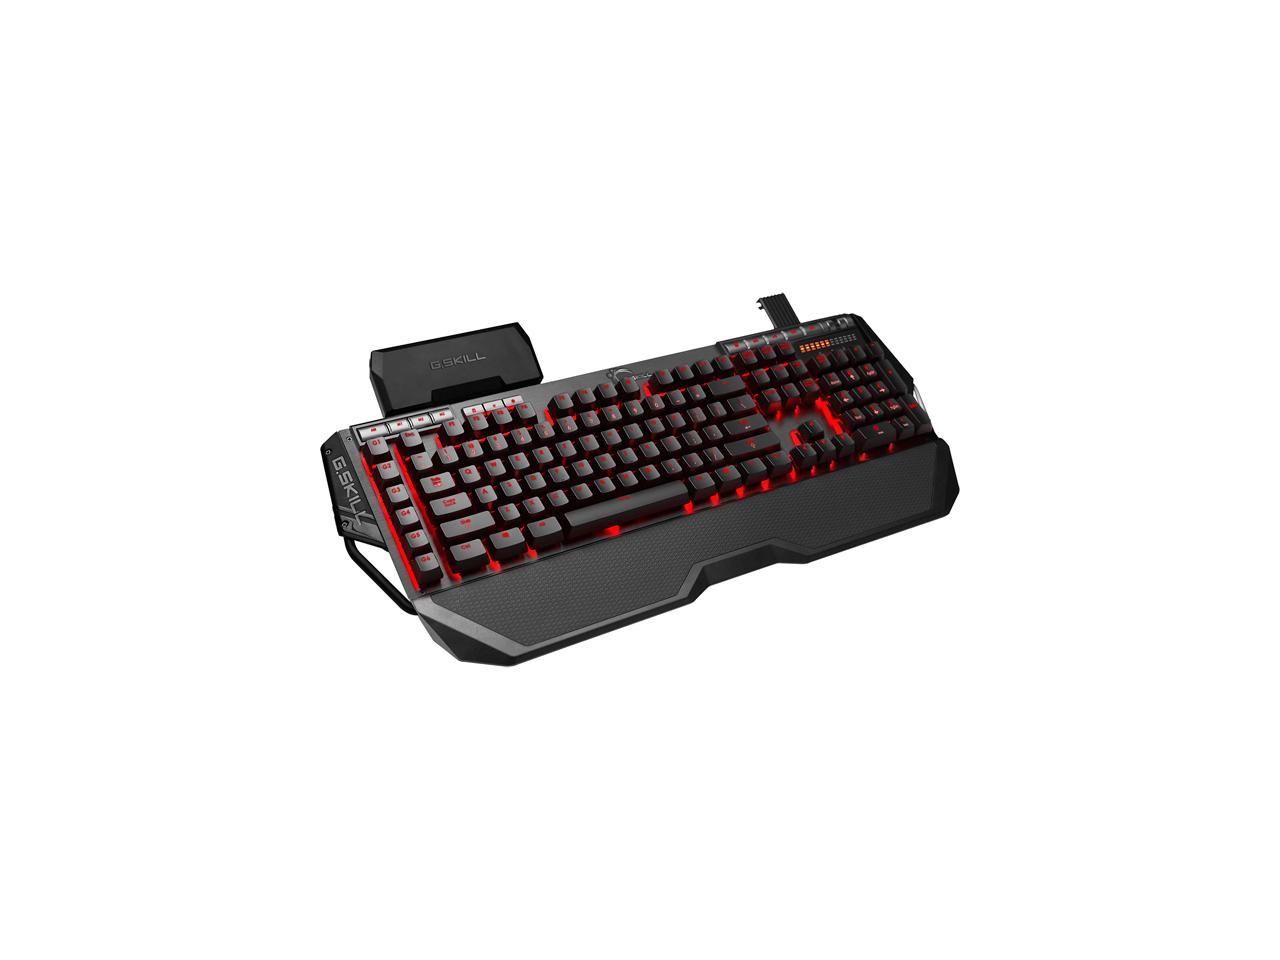 G.SKILL RIPJAWS KM780 MX Mechanical Gaming Keyboard - Cherry MX Brown with  Gaming Keycaps